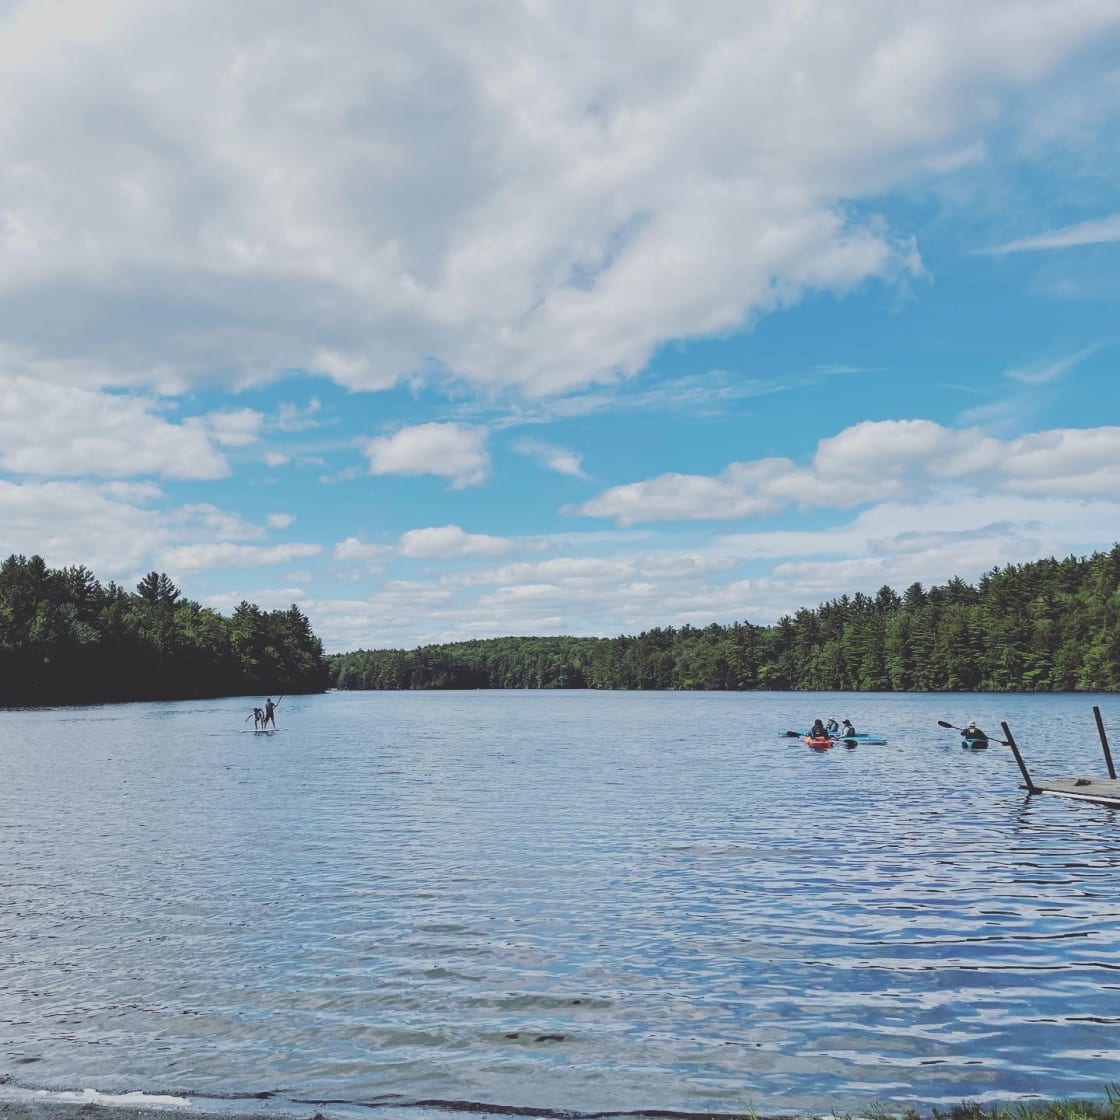 nearby lakes like this one are perfect for paddleboarding, kayaks, canoes, swimming